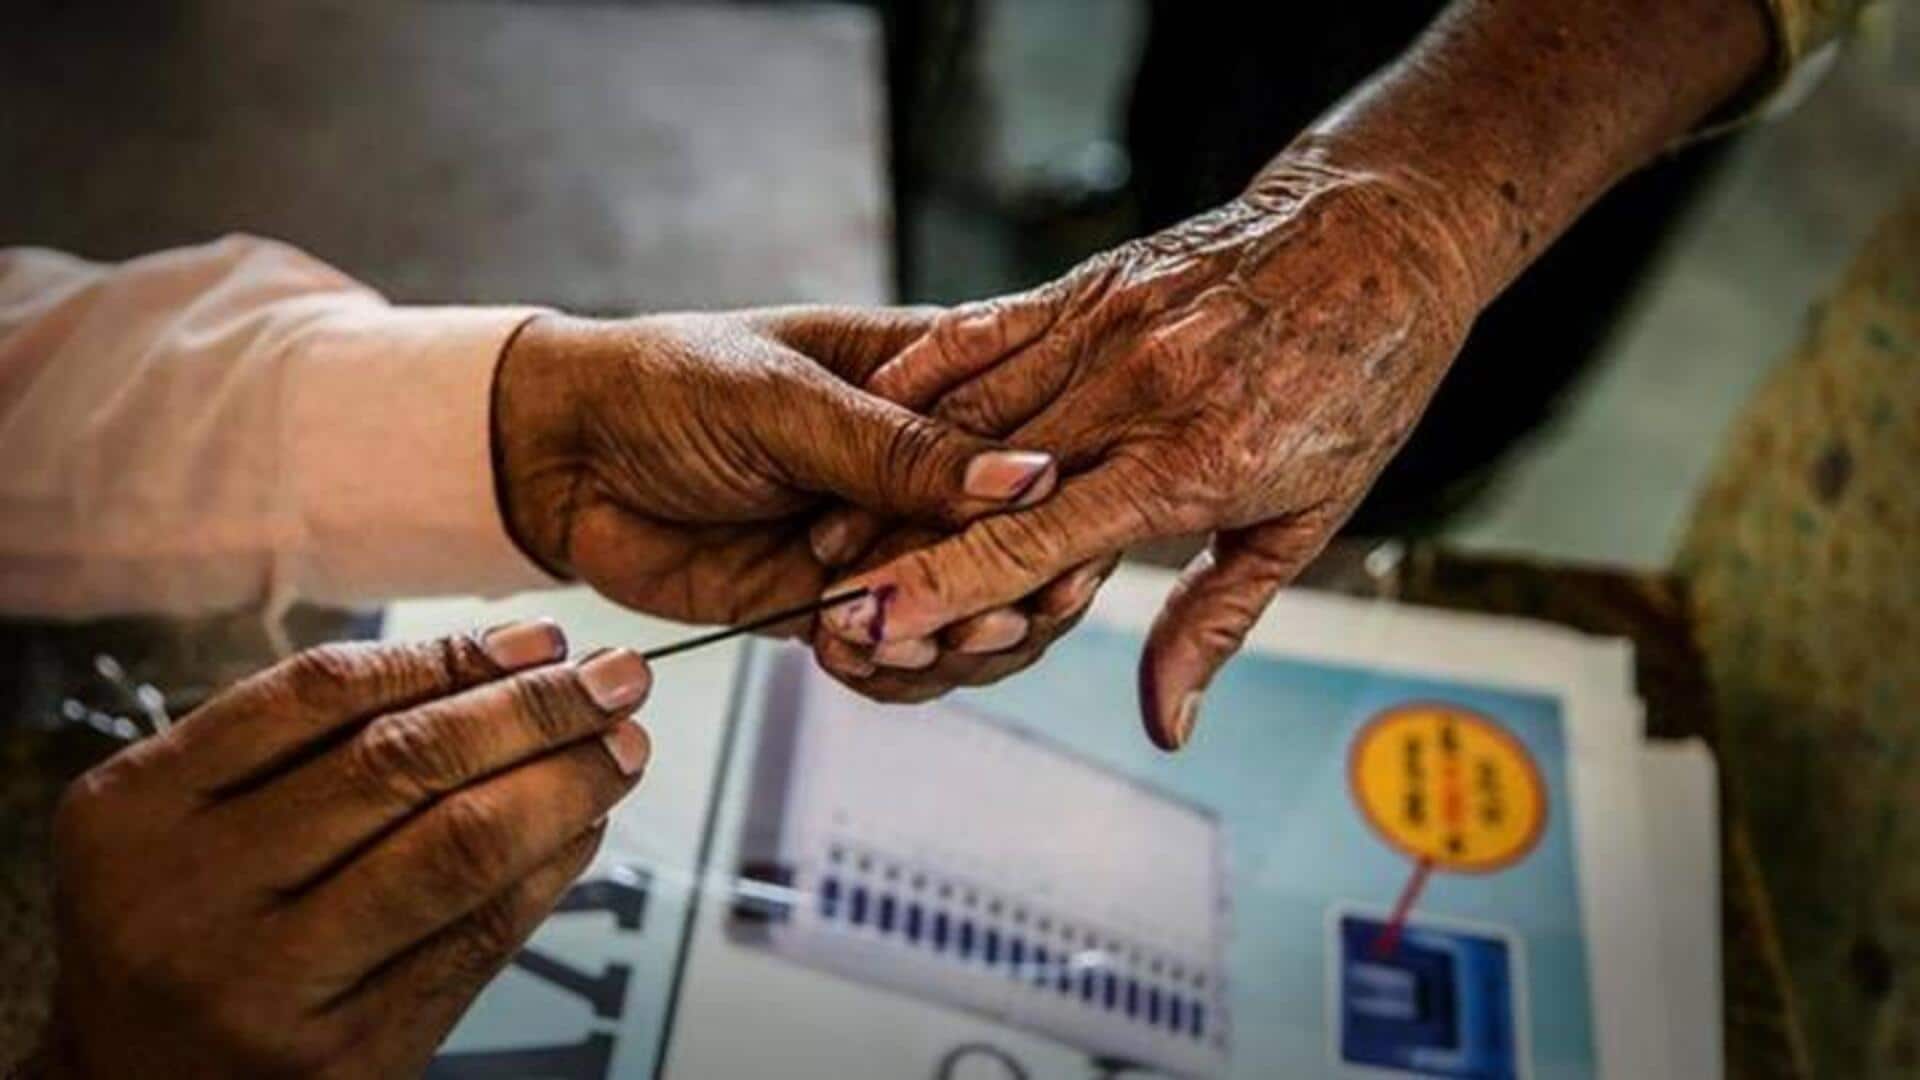 Indian elections: All about the indelible purple ink